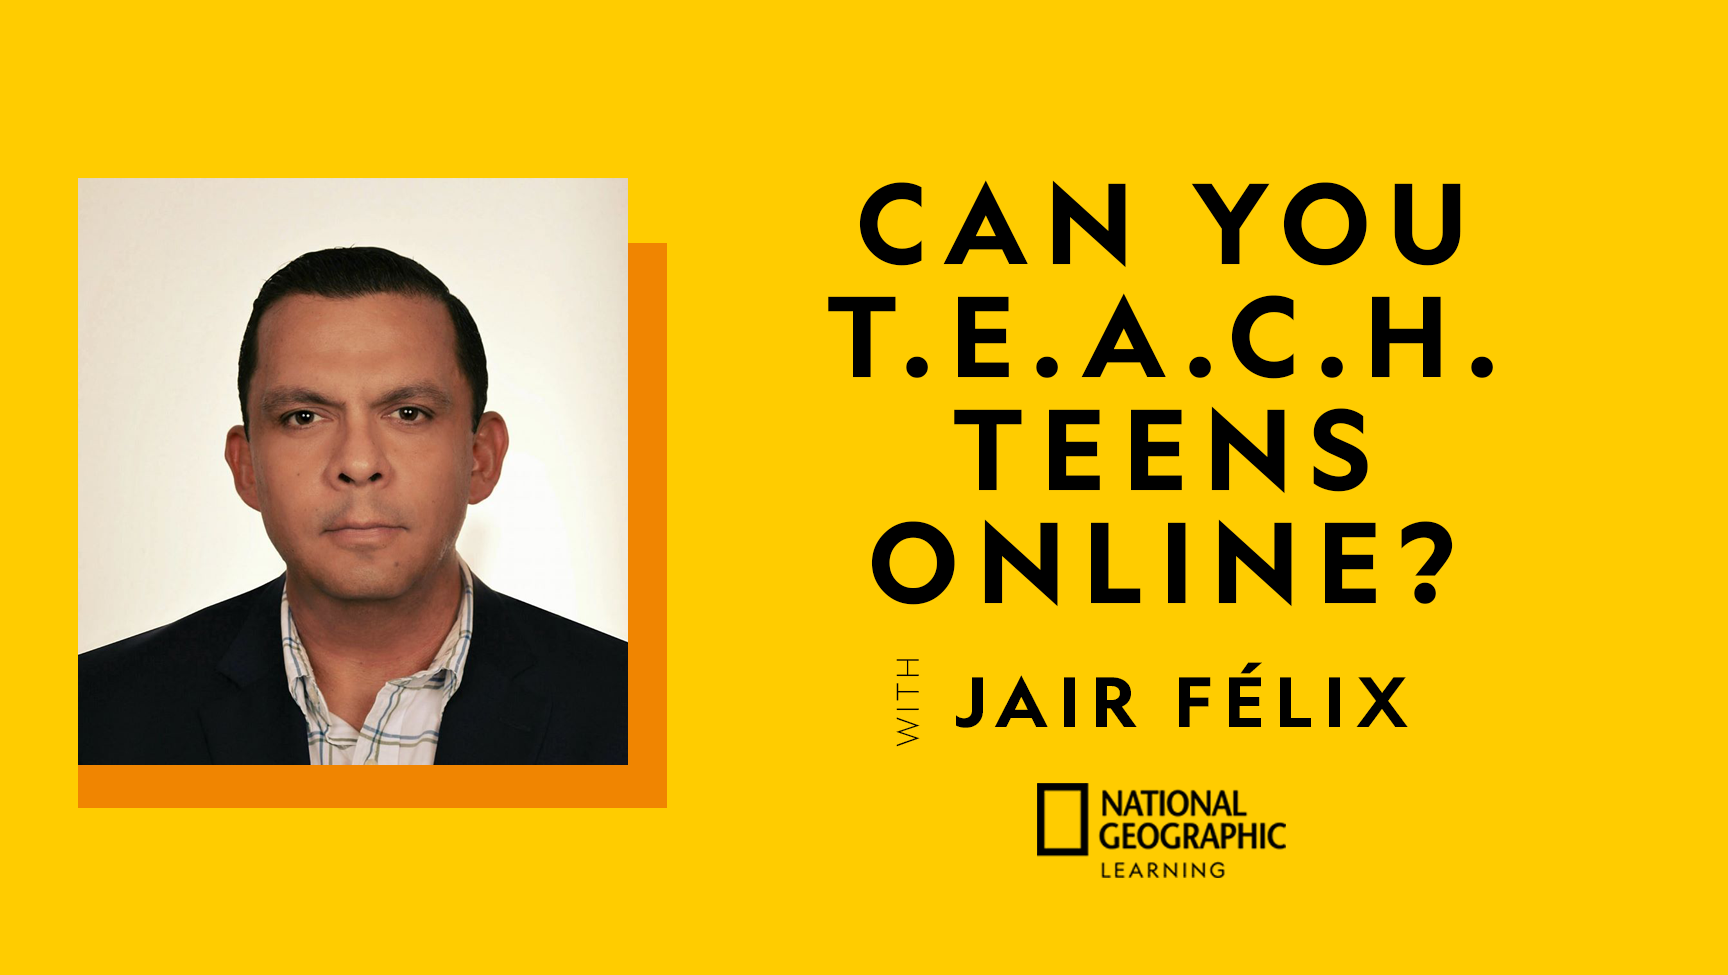 CAN YOU T.E.A.C.H TEENS ONLINE?